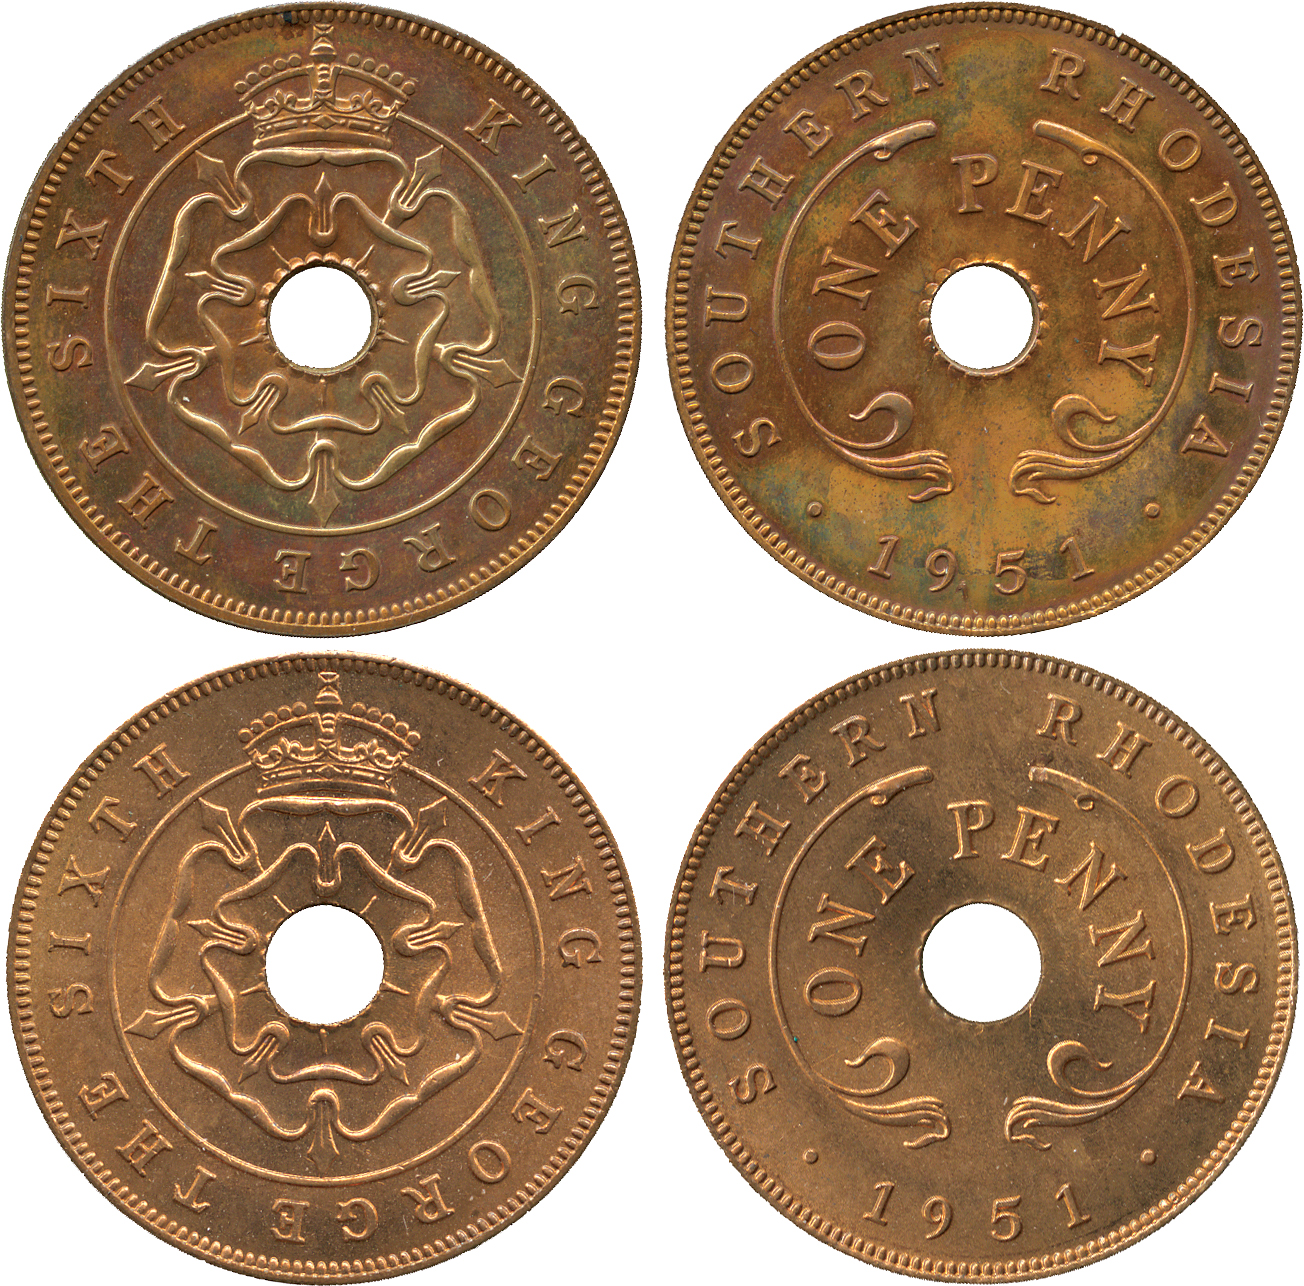 † AFRICA. Rhodesia. Southern Rhodesia. Bronze Proof Penny and Penny, 1951 (KM 25). Choice